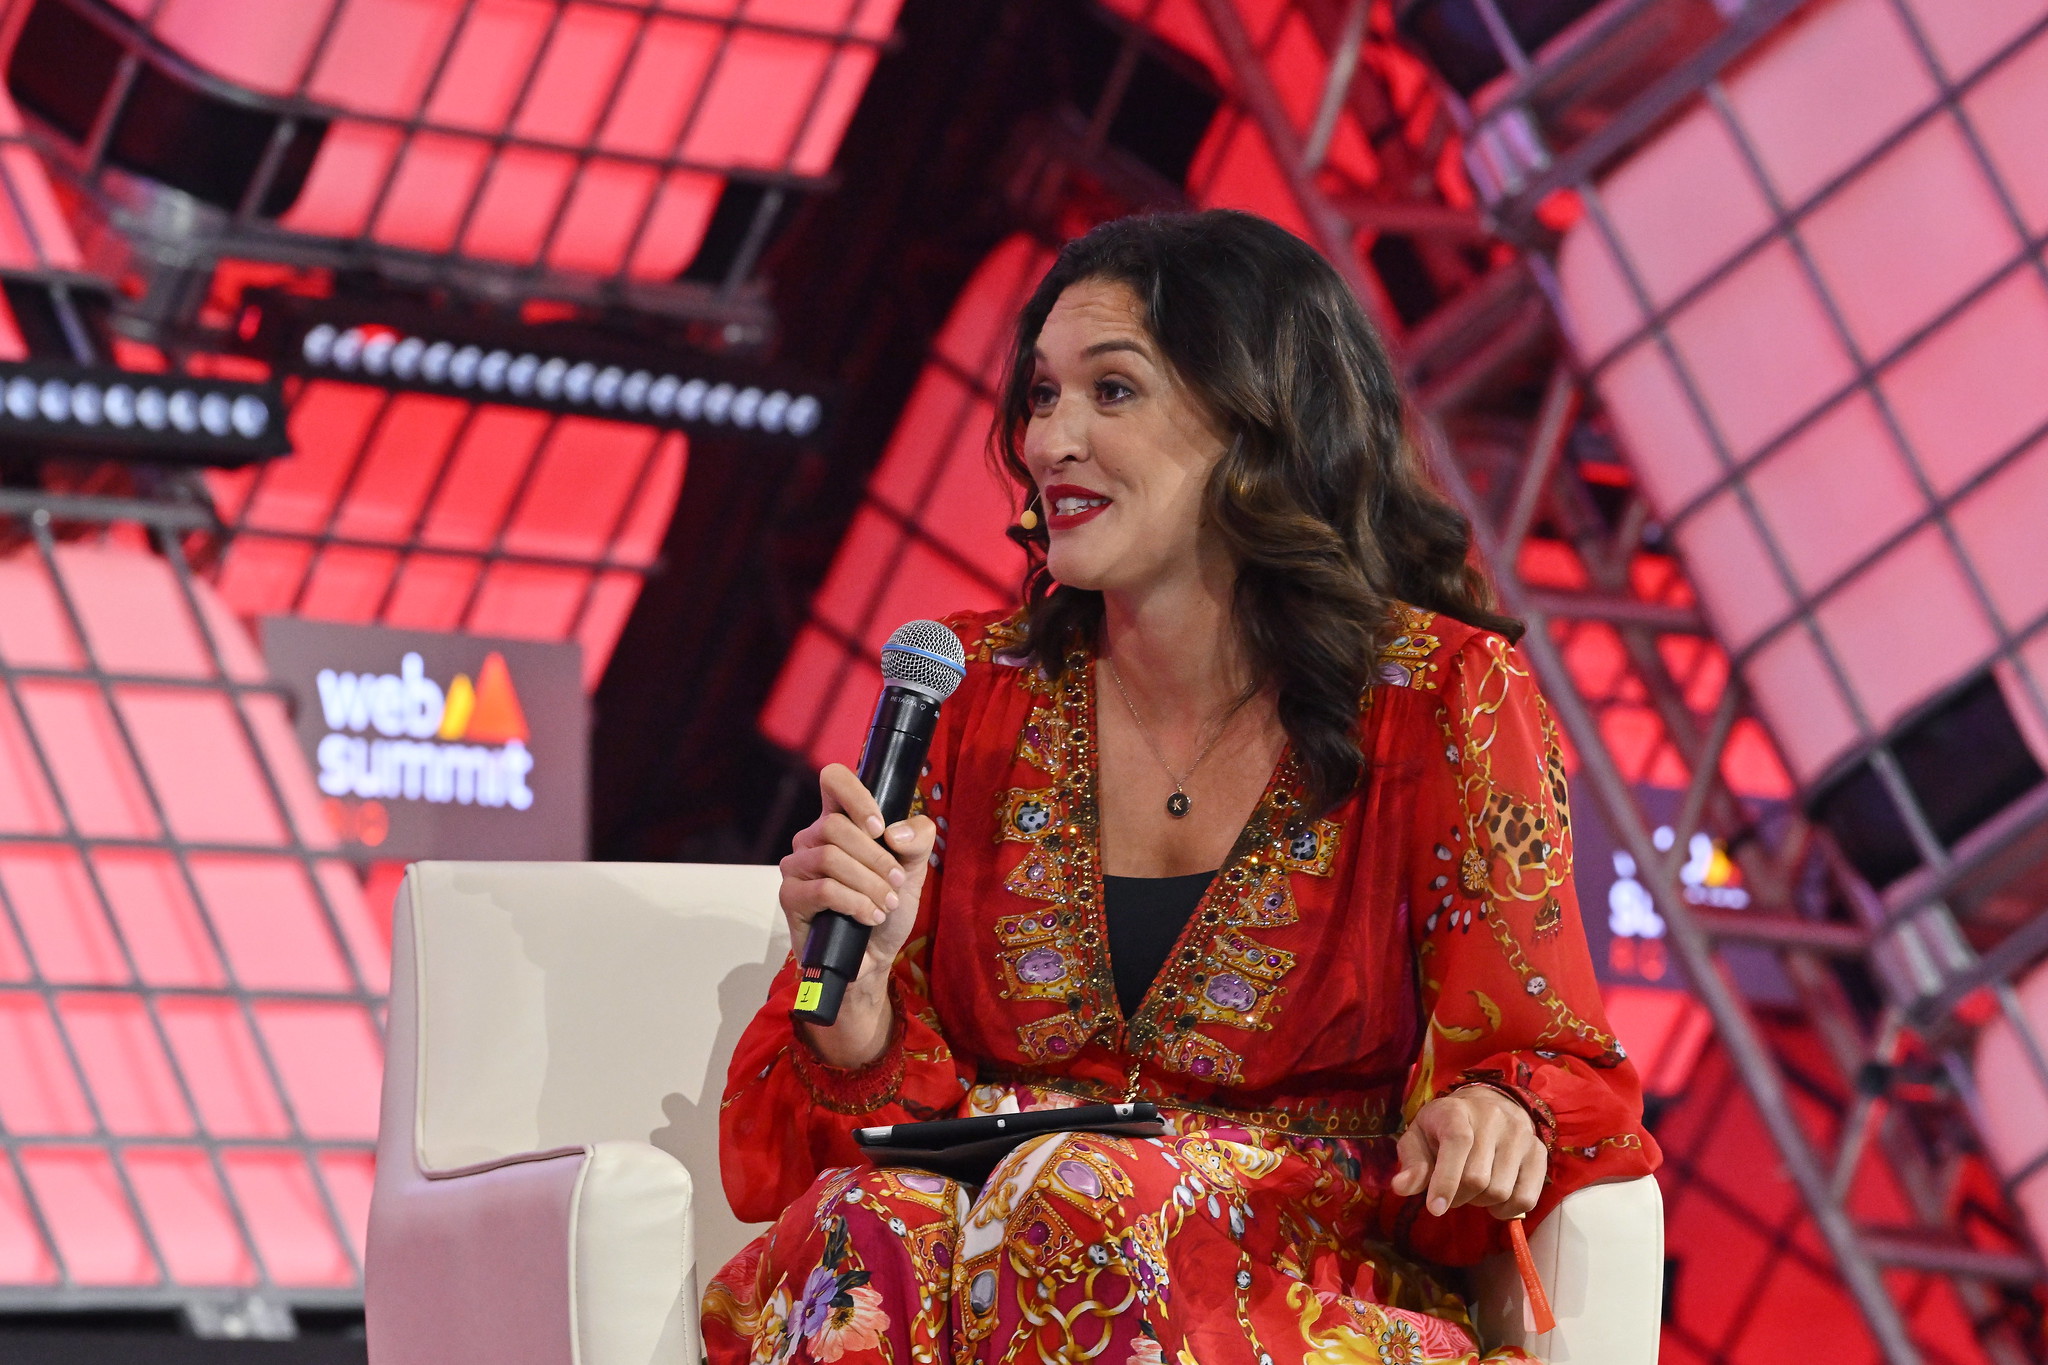 Katie Prescott, Technology Business Editor, The Times, on Centre Stage during day two of Web Summit Rio 2023 at Riocentro in Rio de Janeiro, Brazil.